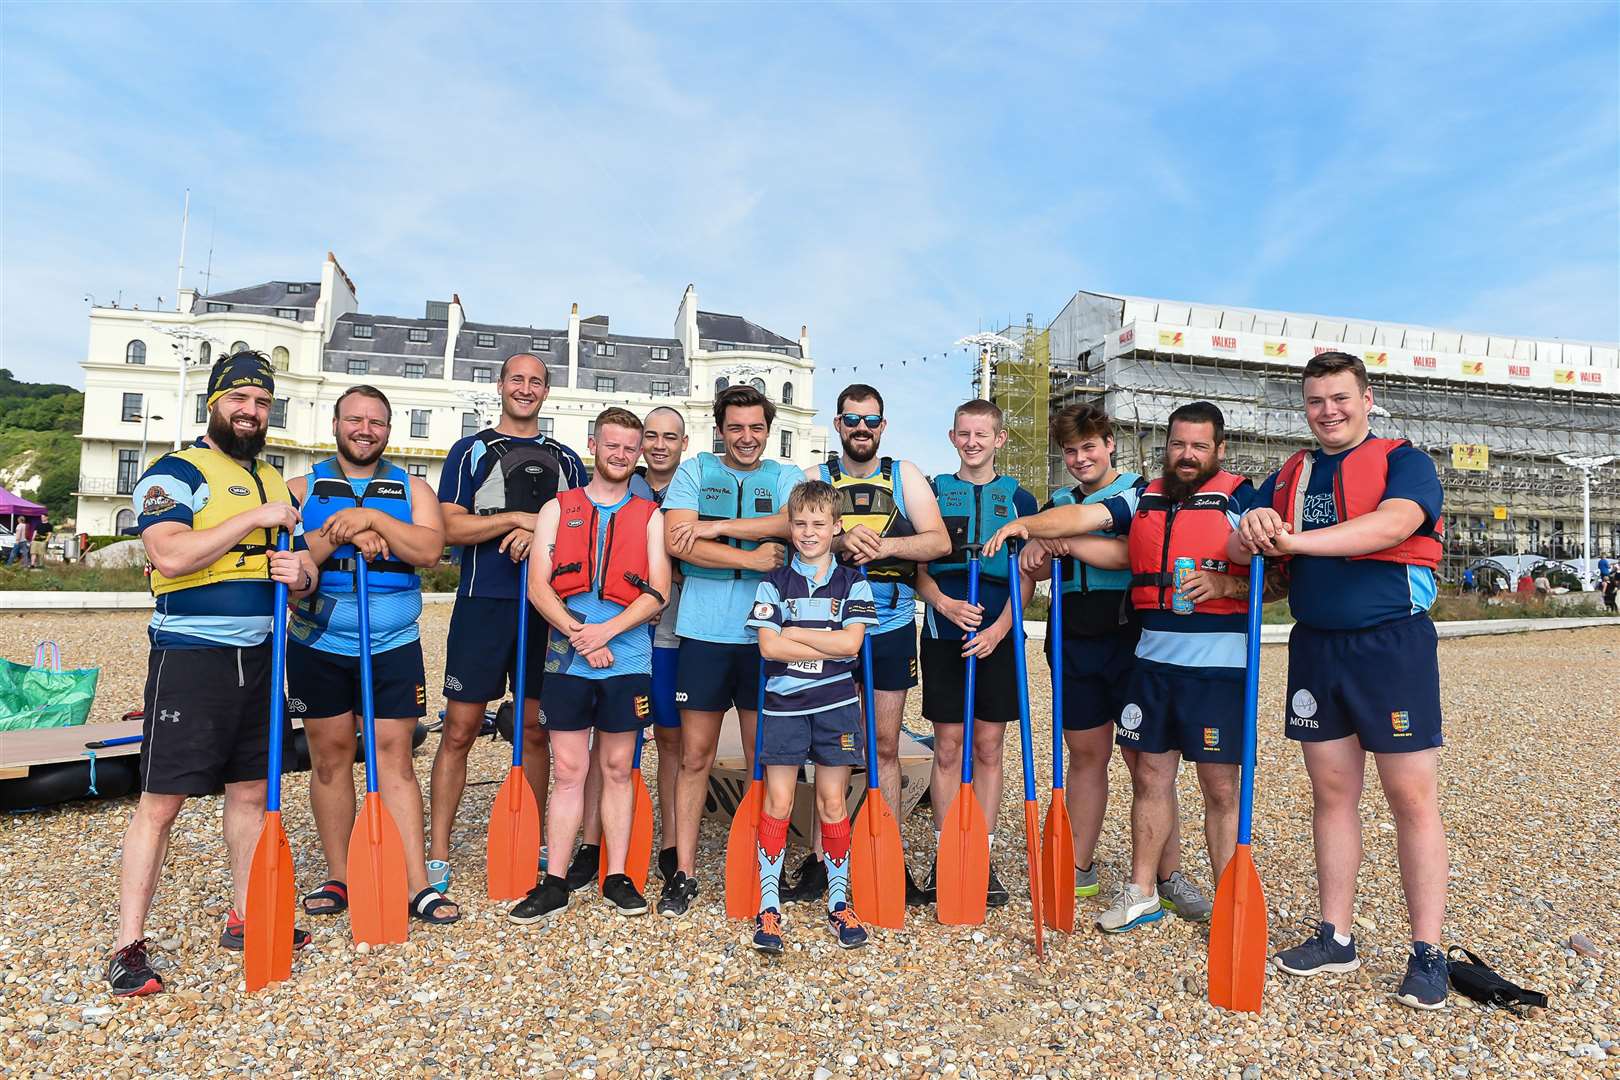 Dover Sharks Rugby raft team at the last Dover regatta on August 4, 2019. Picture: Alan Langley for KMG